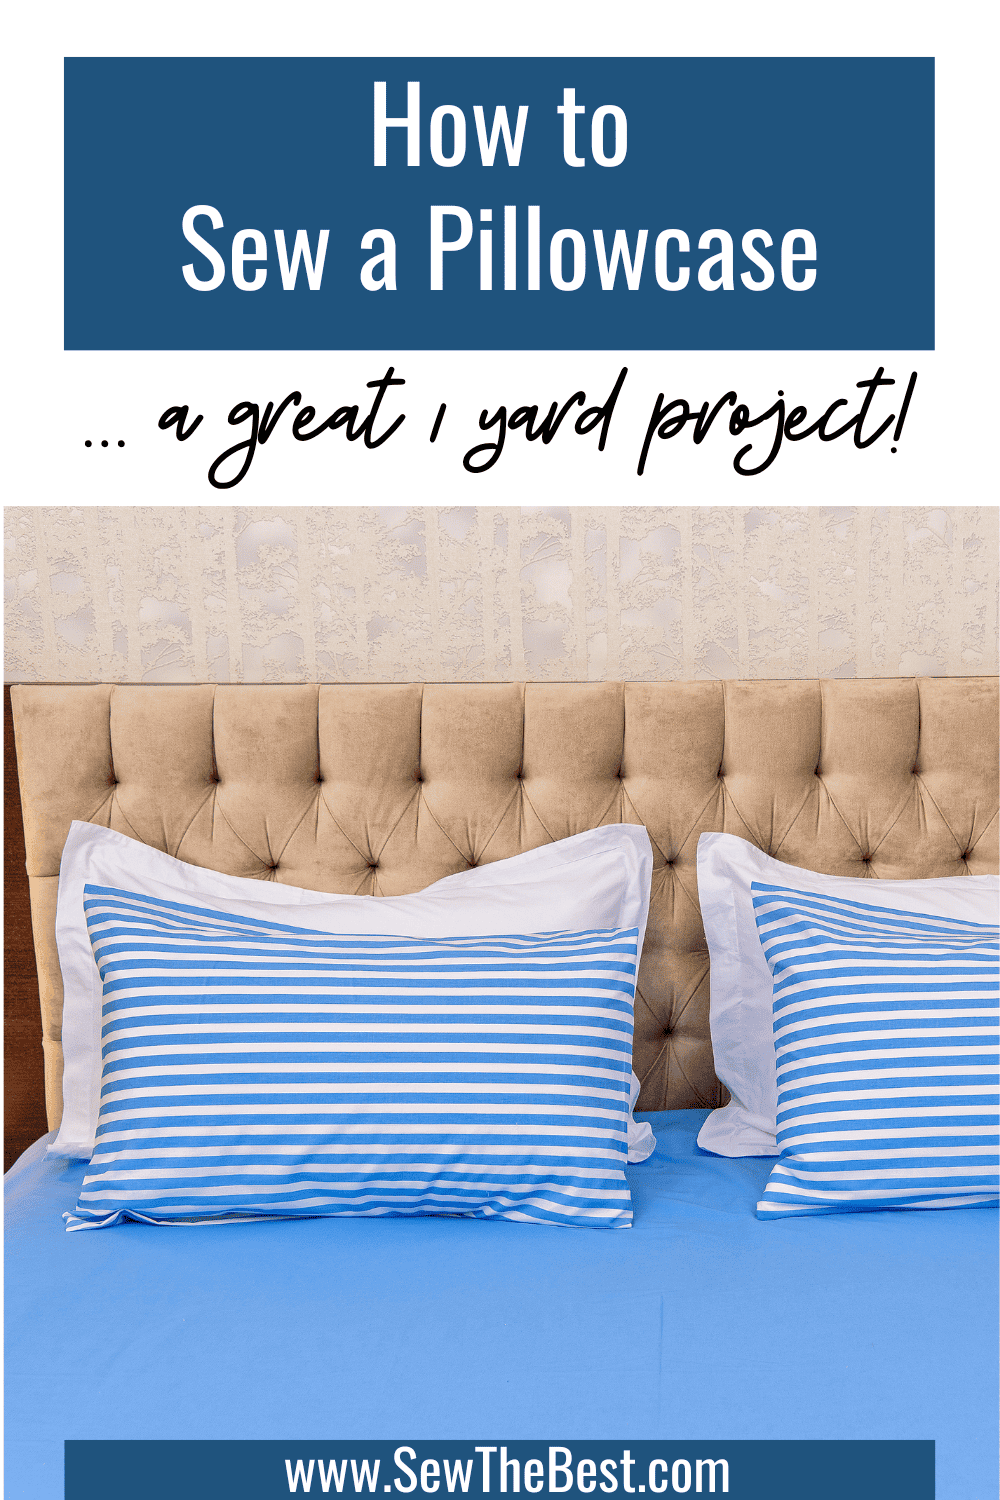 How to Sew a Pillowcase ... a great 1 yard project. Pictures of a well made bed with white and blue pillows follows.